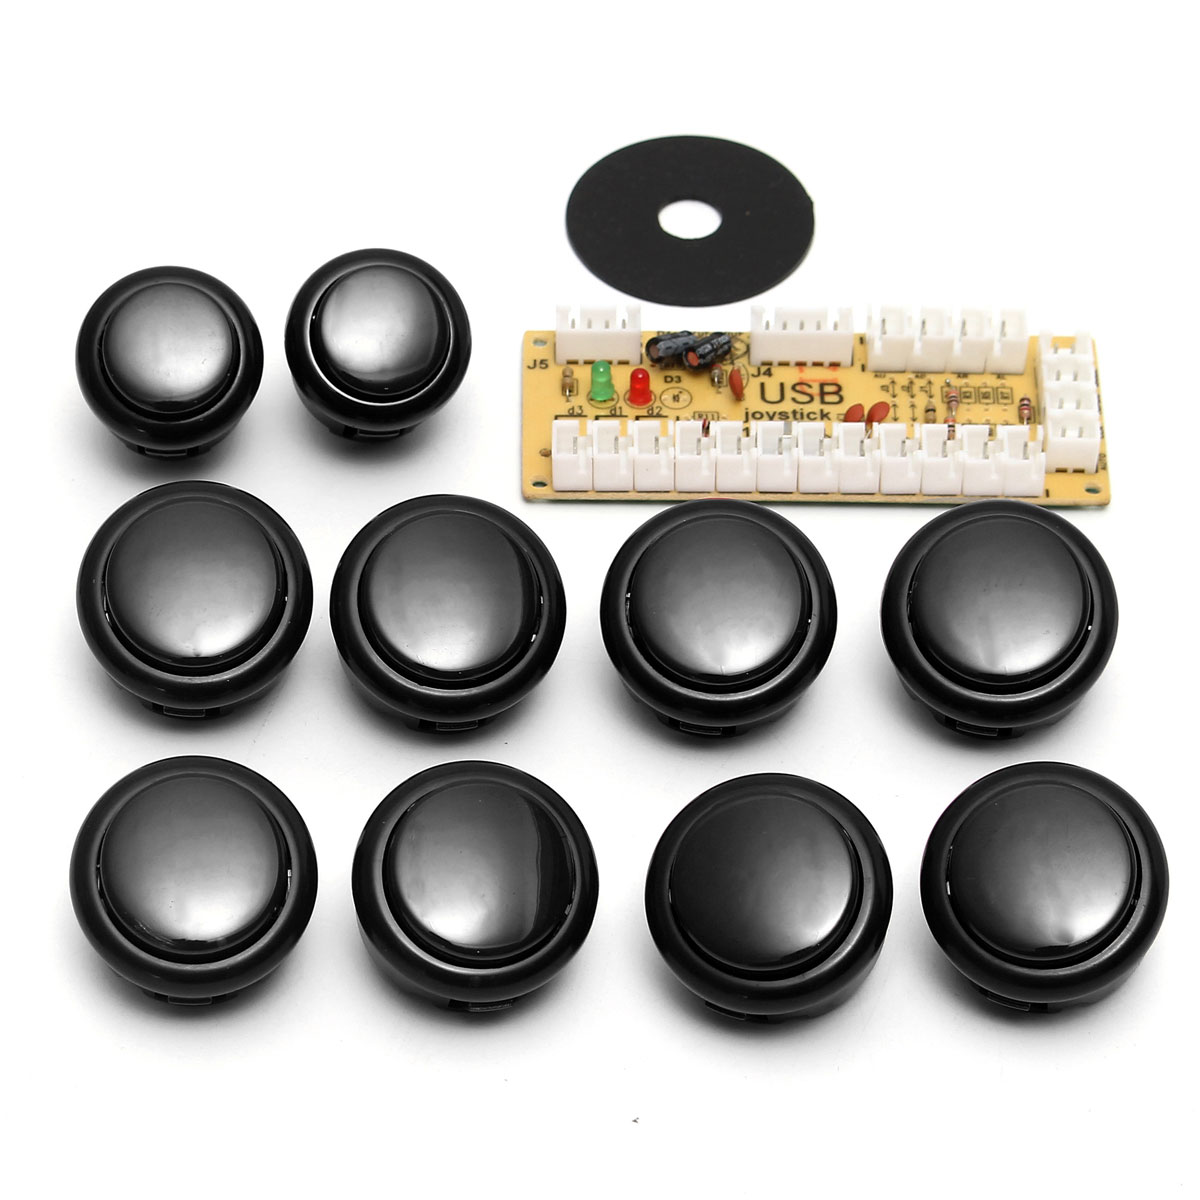 Game DIY Arcade Set Kits Replacement Parts USB Encoder to PC Joystick and Buttons 14